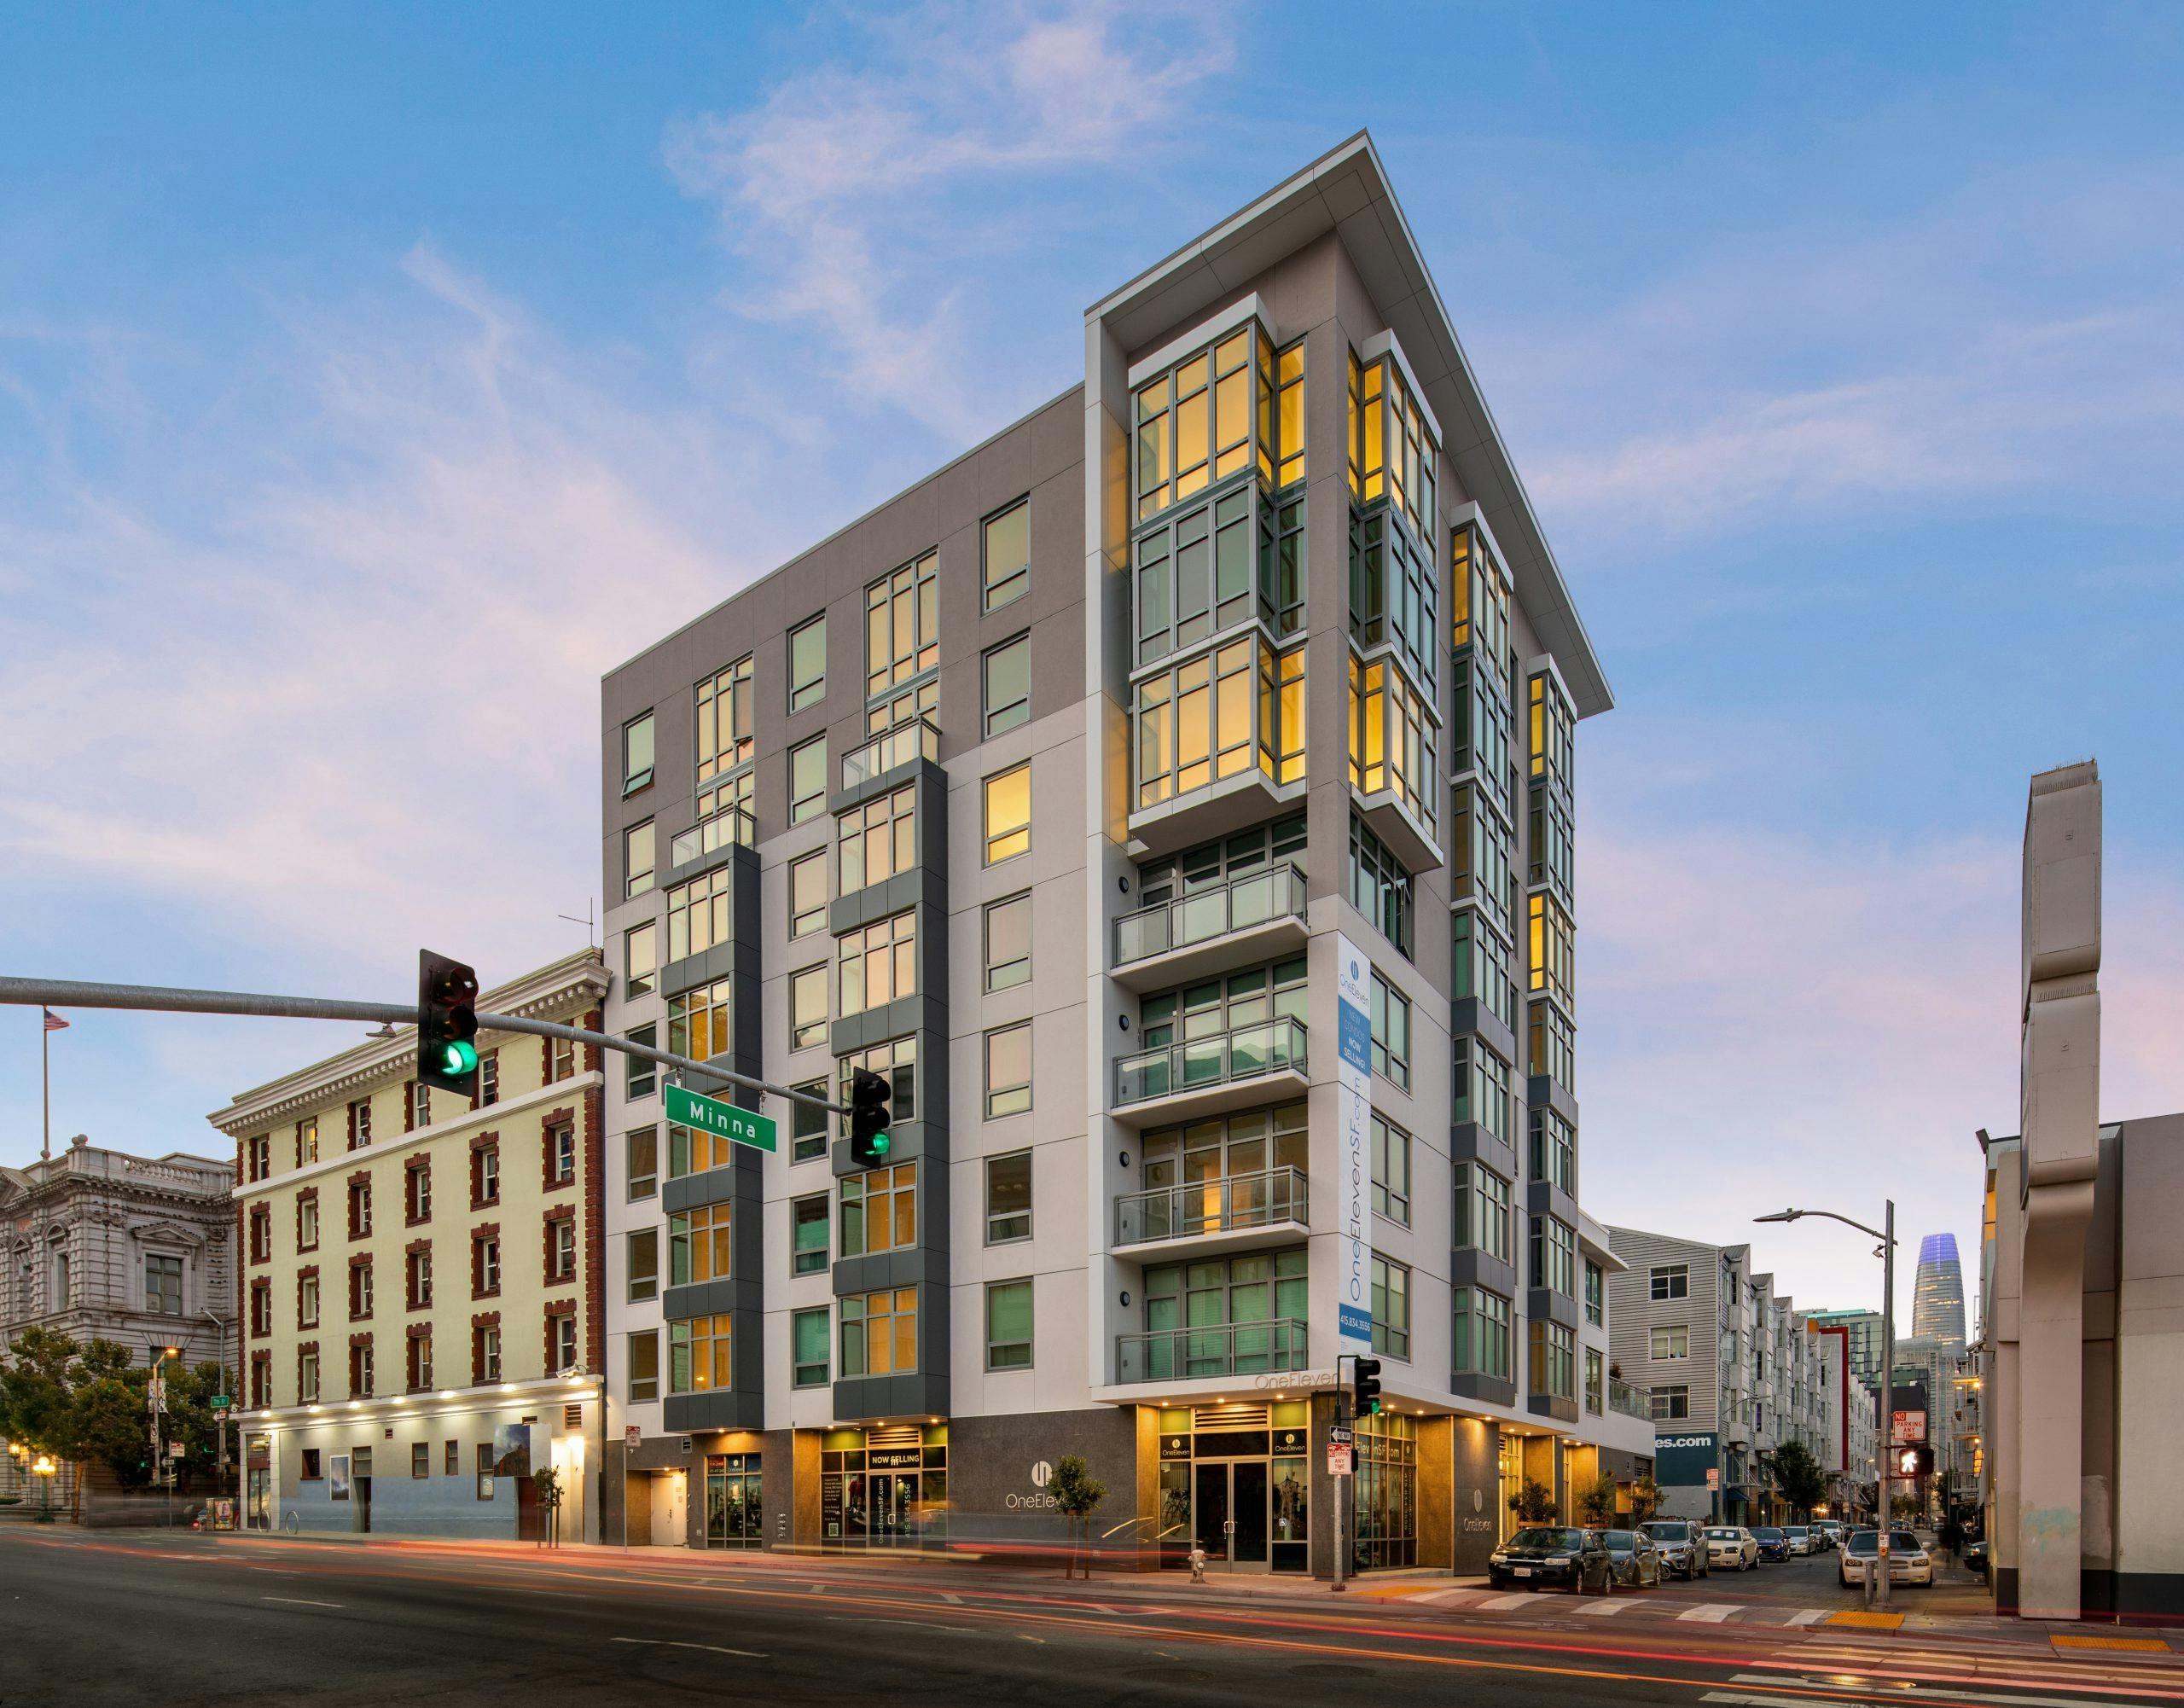 OneEleven SF is 8 stories tall and resides in SoMa, or South of Market. 